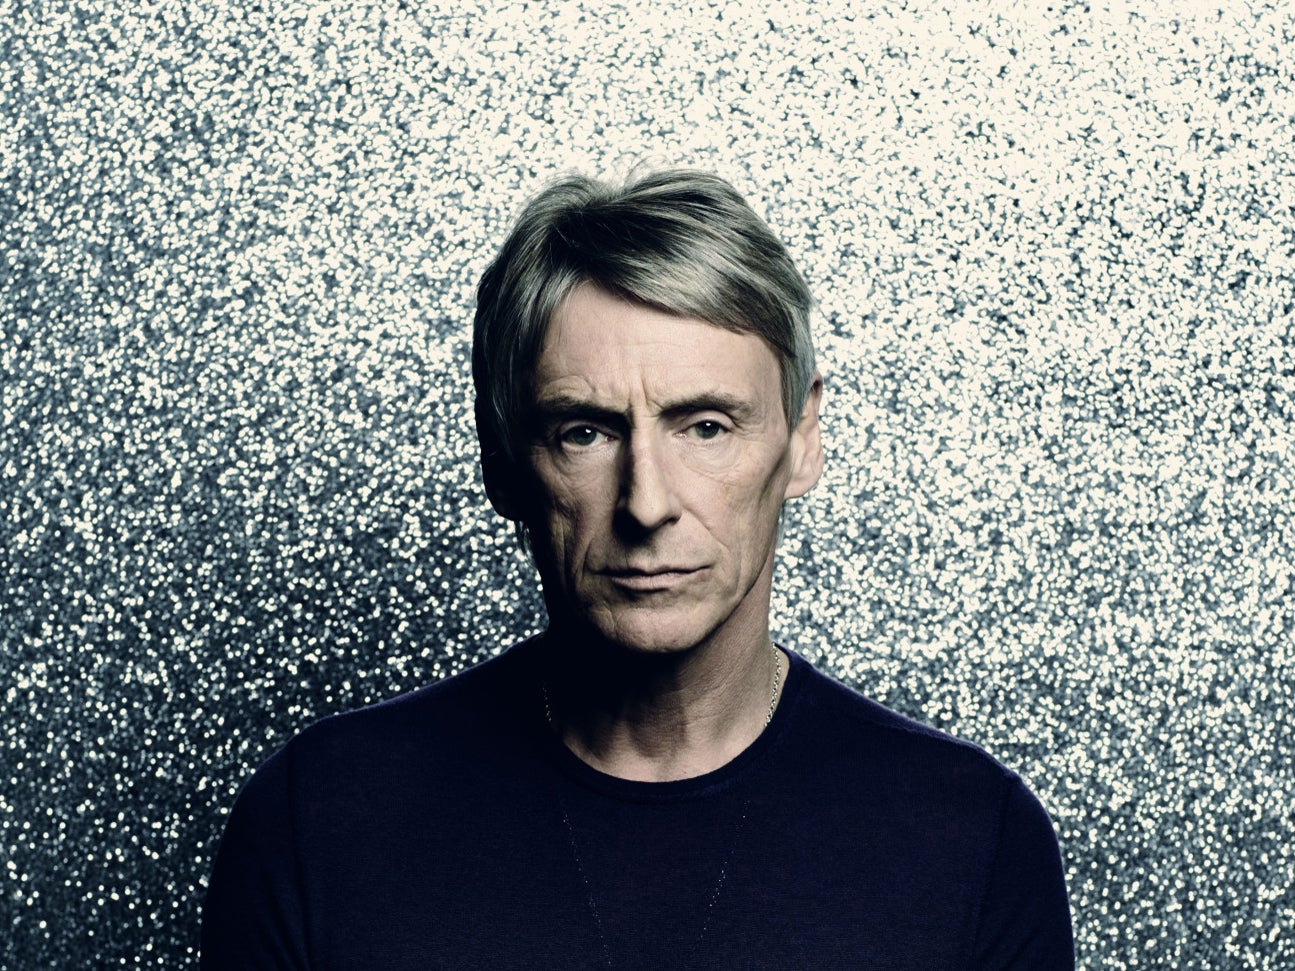 Paul Weller looking serious while promoting 'Saturn Patterns'